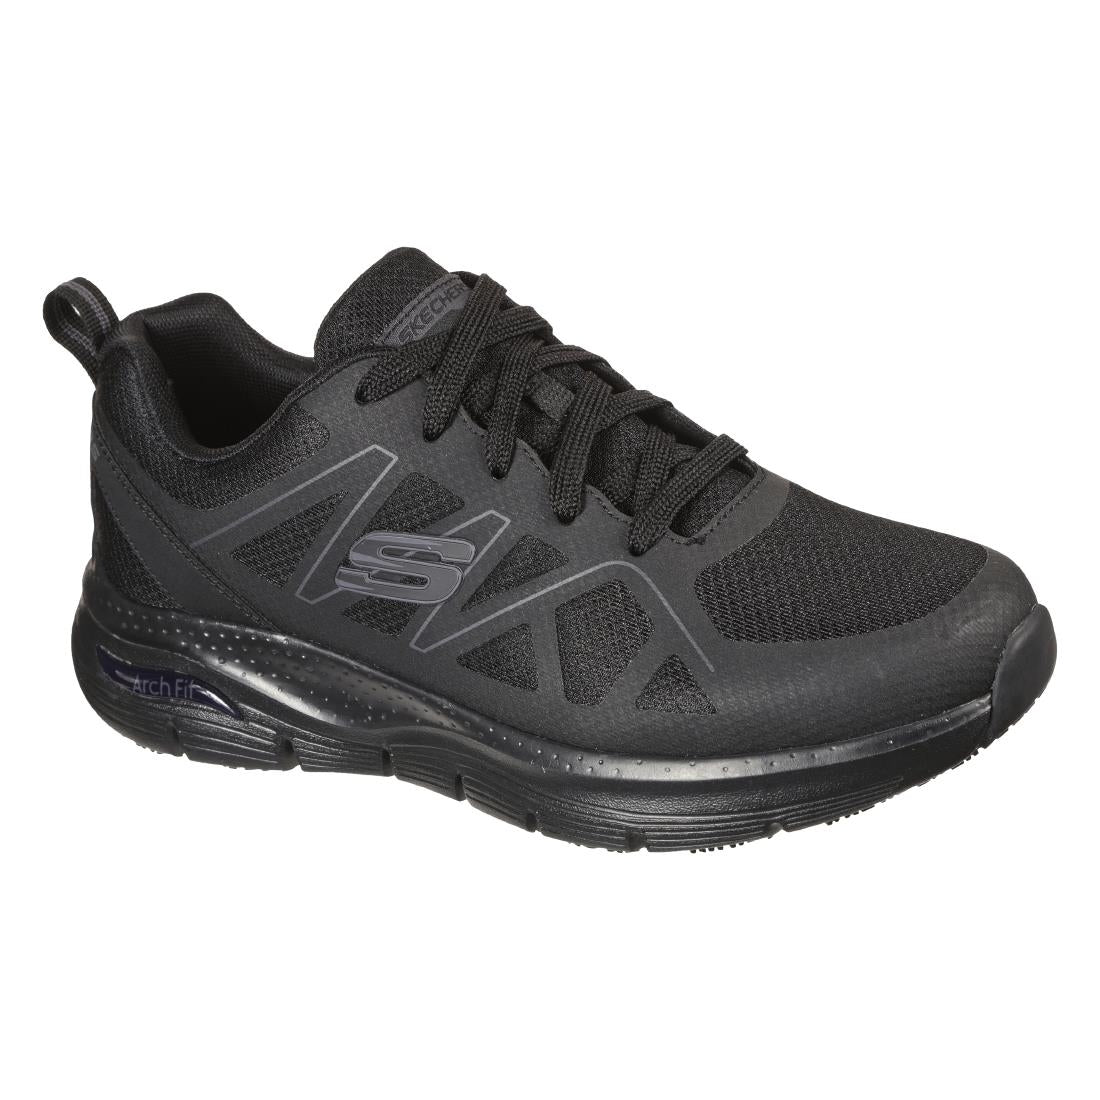 BB673-43 Skechers Axtell Slip Resistant Arch Fit Trainer Size 43 JD Catering Equipment Solutions Ltd